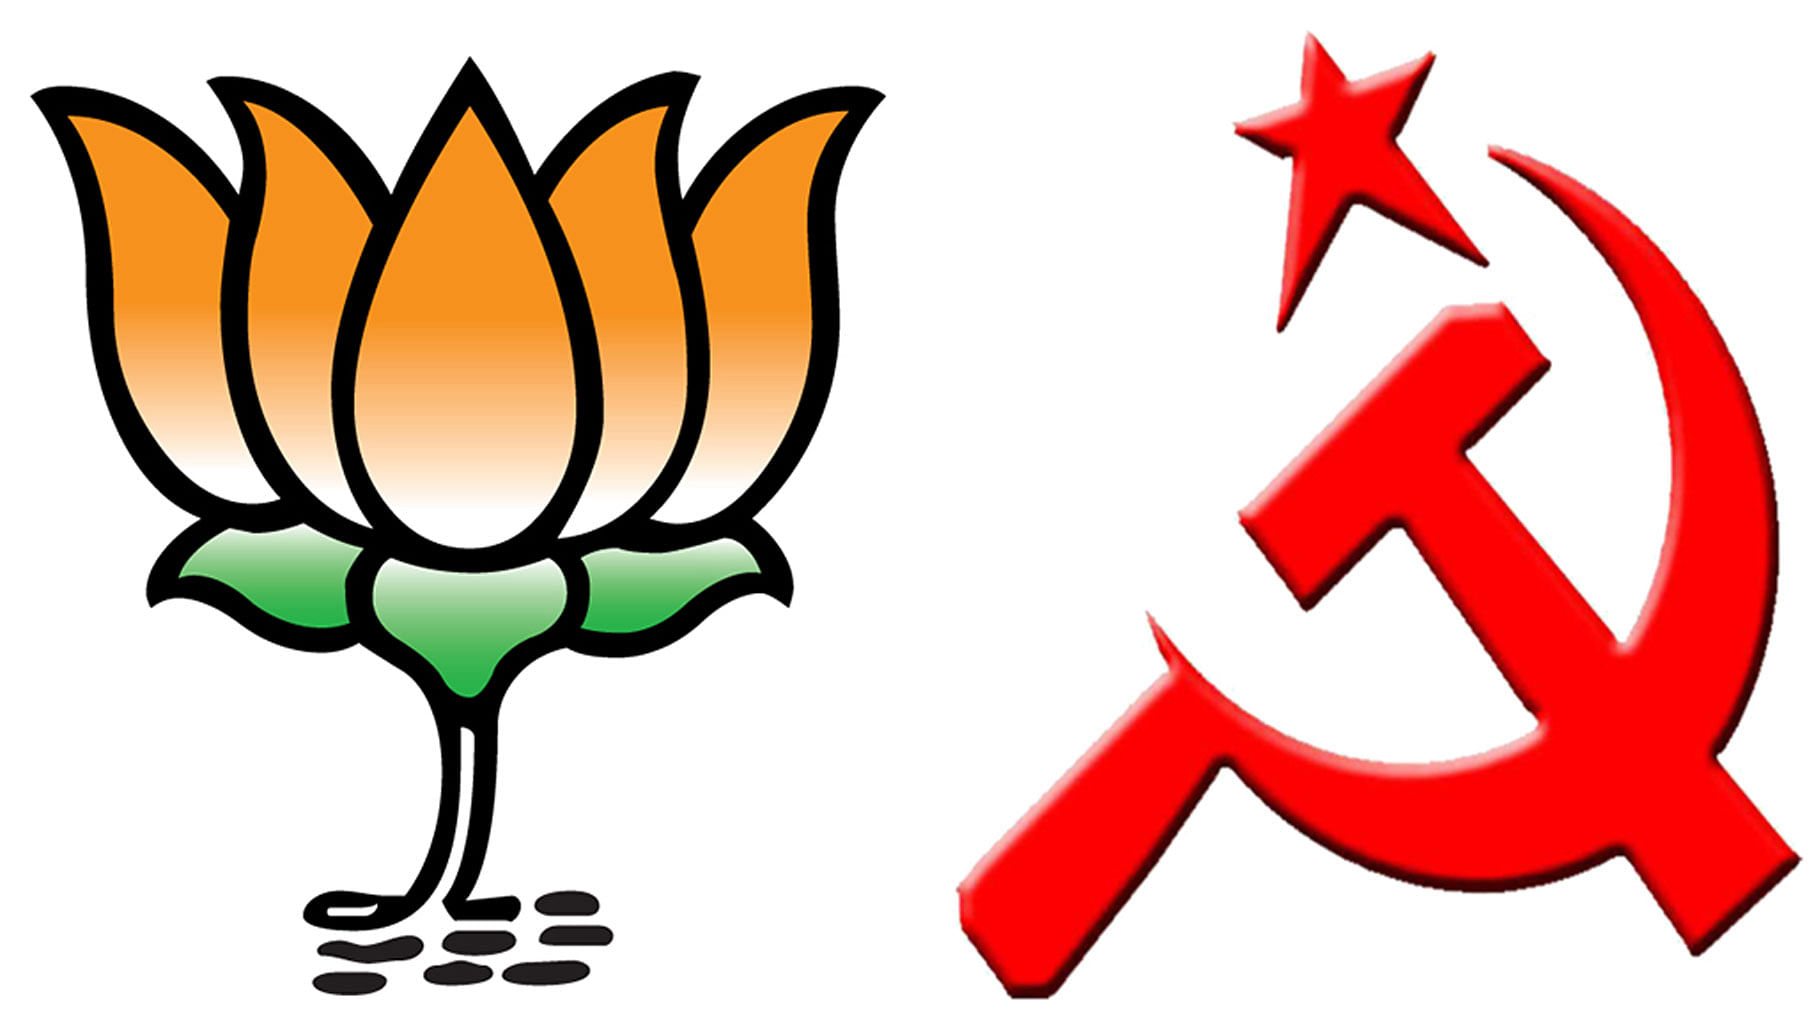 The BJP (left) and CPI(M) logo. (Photo: <b>The Quint</b>)